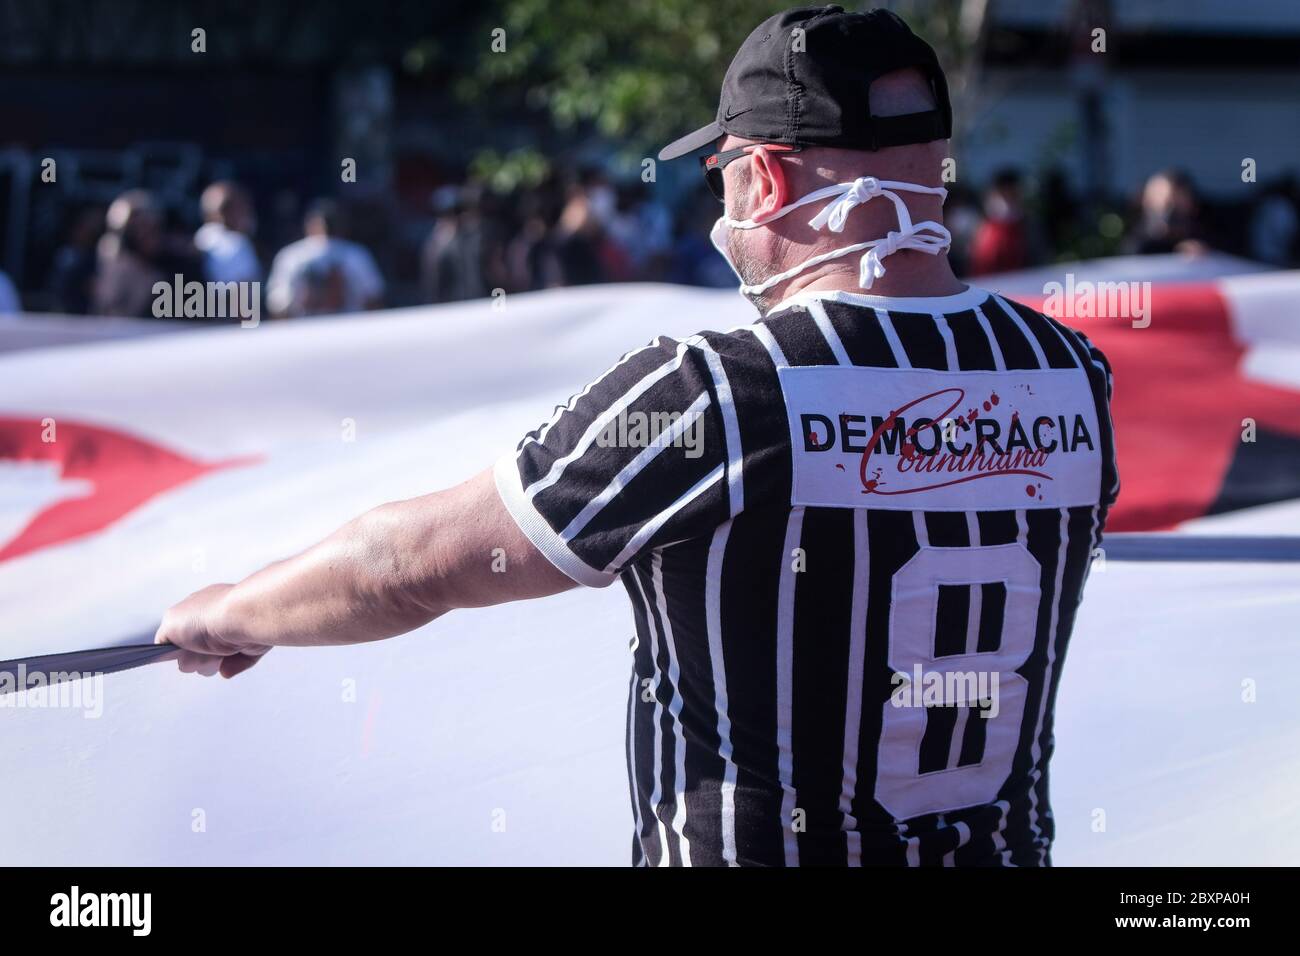 09 October 2019, Brazil, São Paulo: A man in the Corinthians' club jersey takes part in a protest against President Jair Bolsonaro. The demonstrations by Bolsonaro supporters - on the initiative of organised football fans - were the first to show resistance. Photo: Lincon Zarbietti/dpa Stock Photo